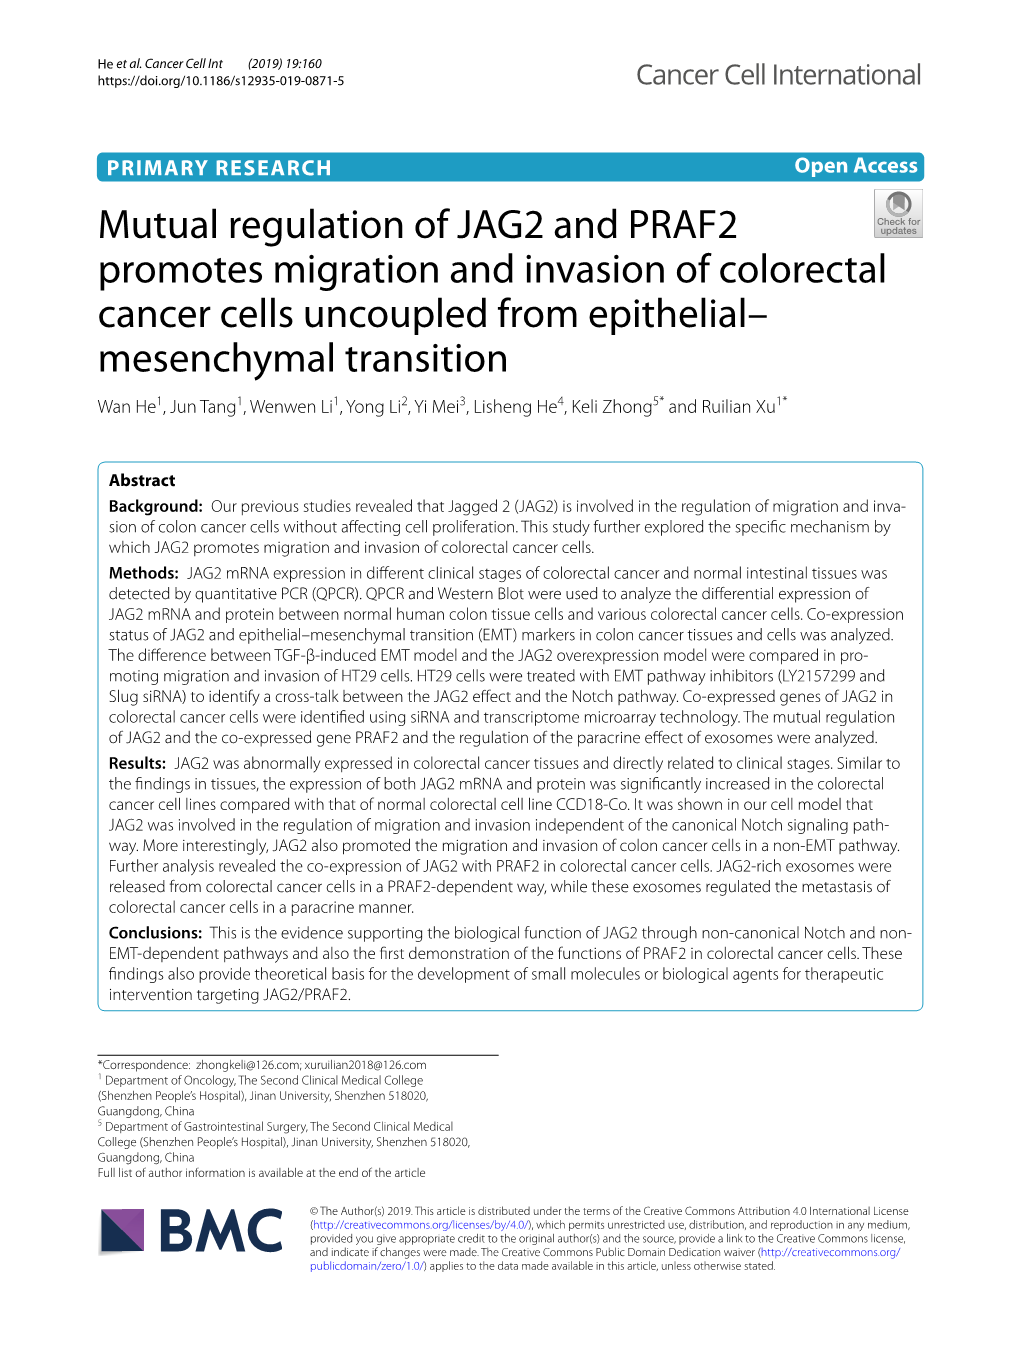 Mutual Regulation of JAG2 and PRAF2 Promotes Migration and Invasion Of